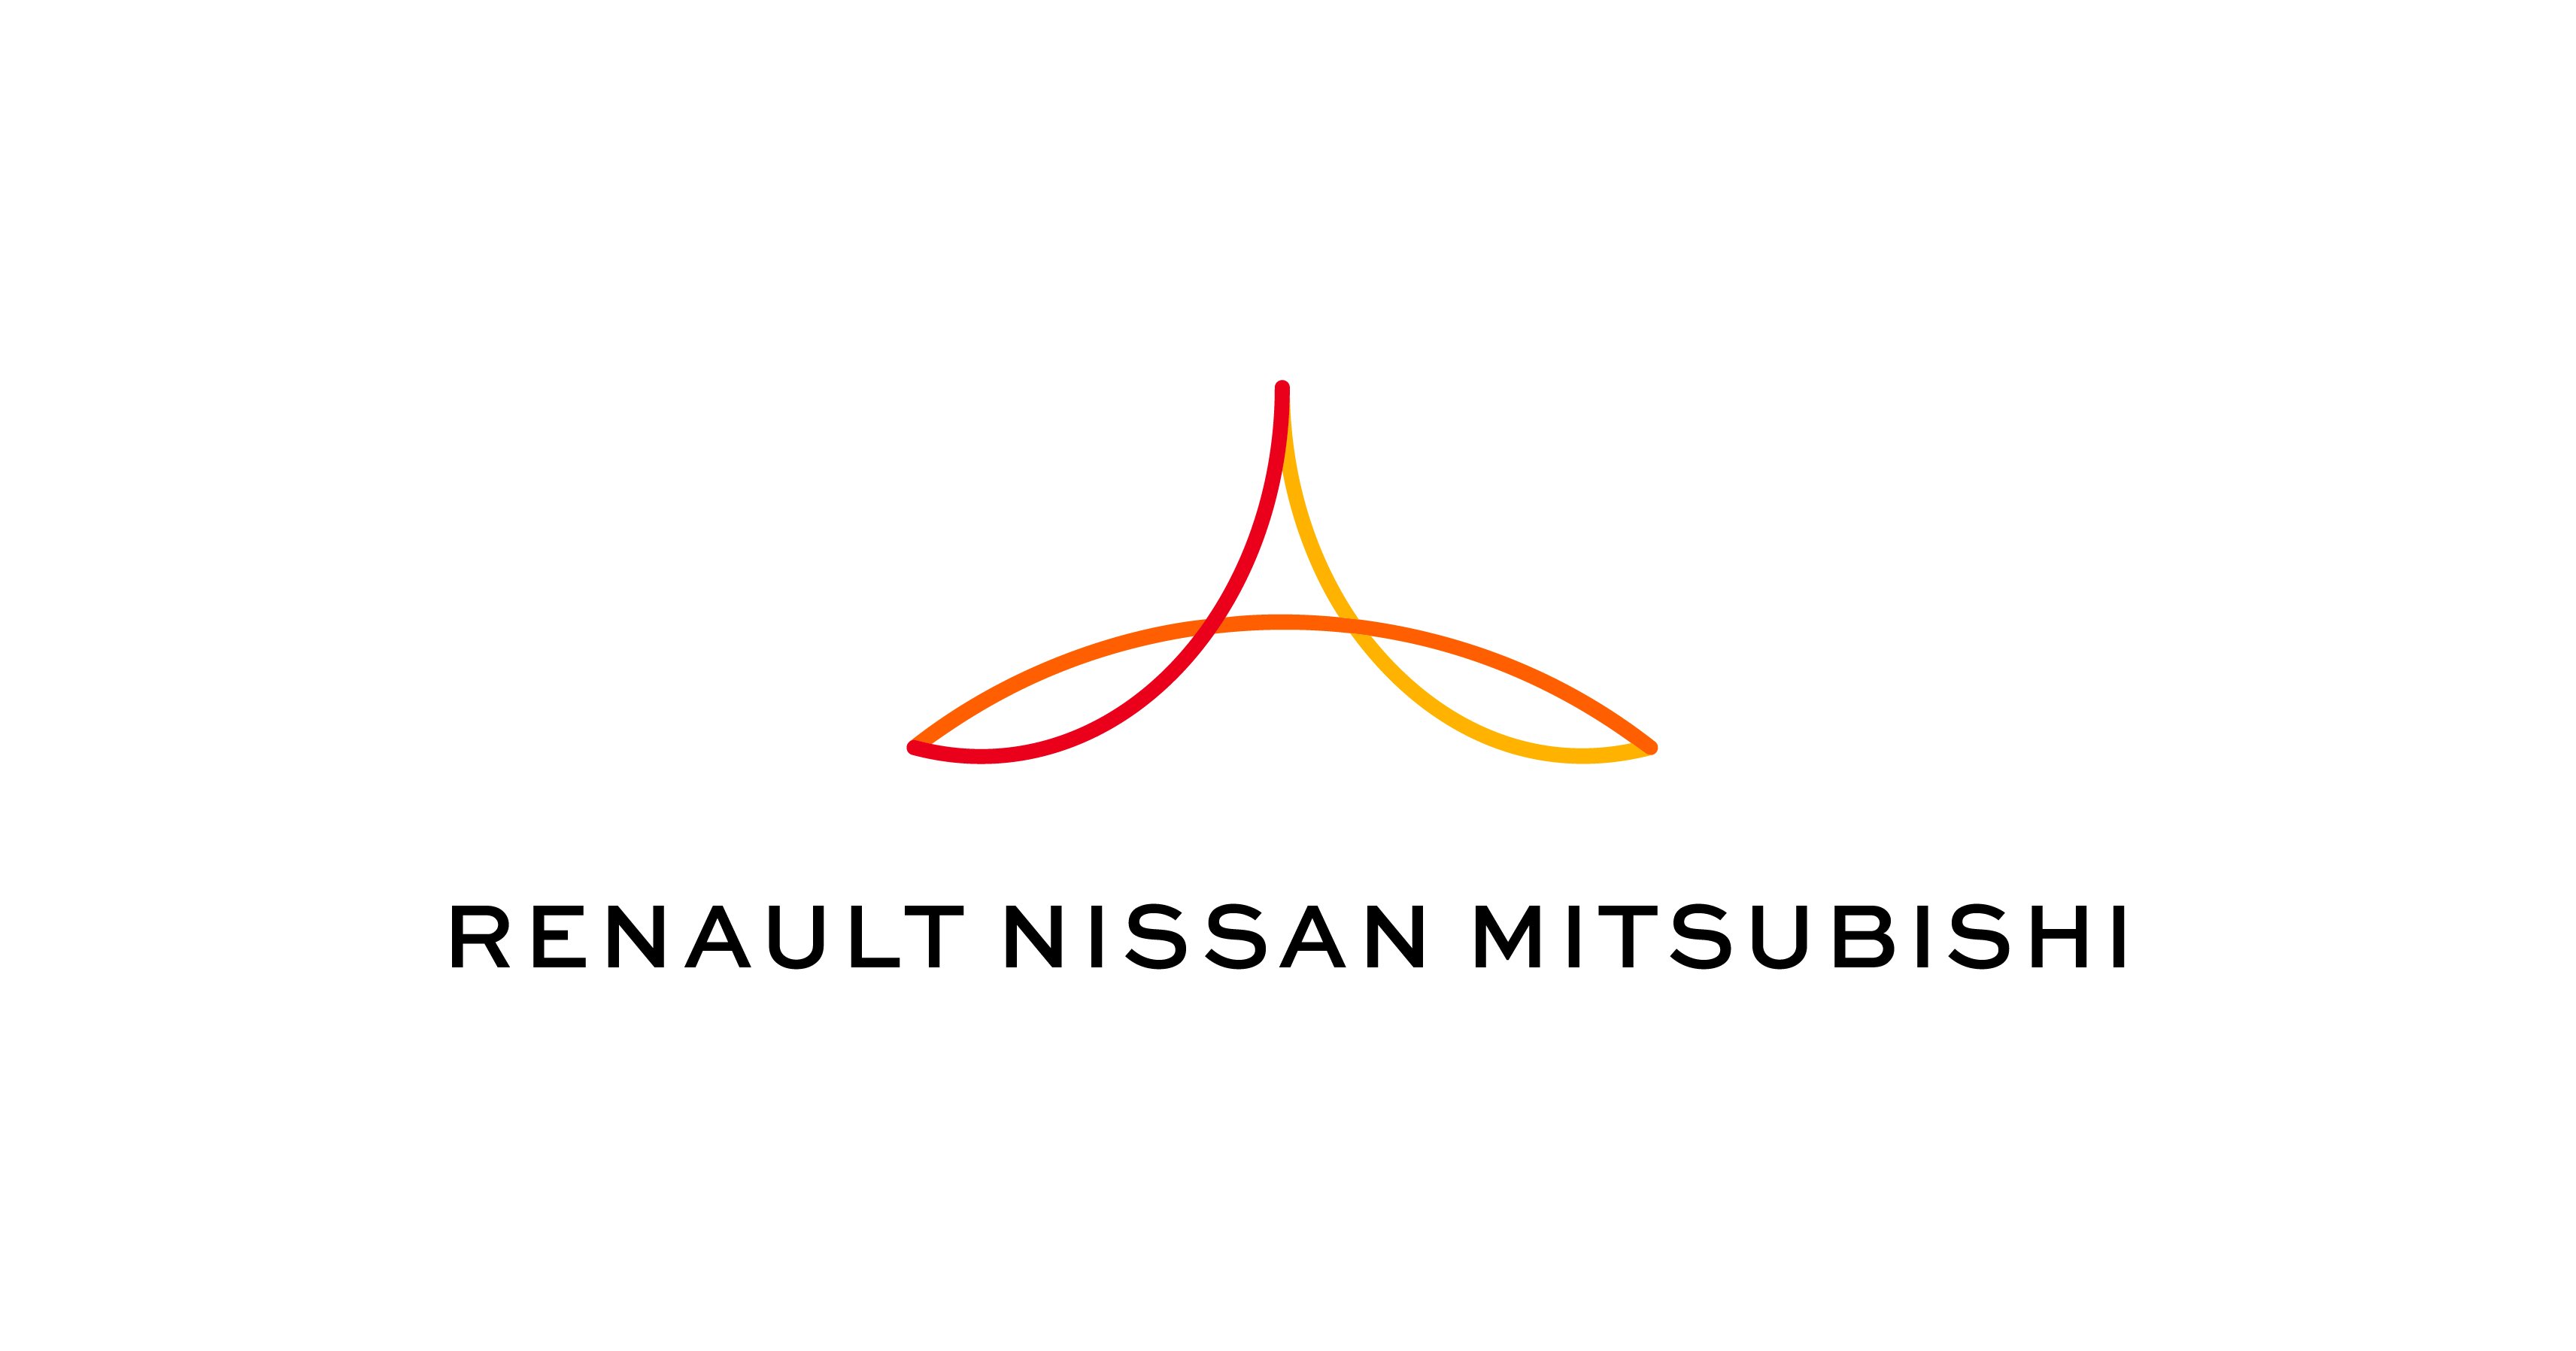 Renault Nissan Mitsubishi sharing resources and investment